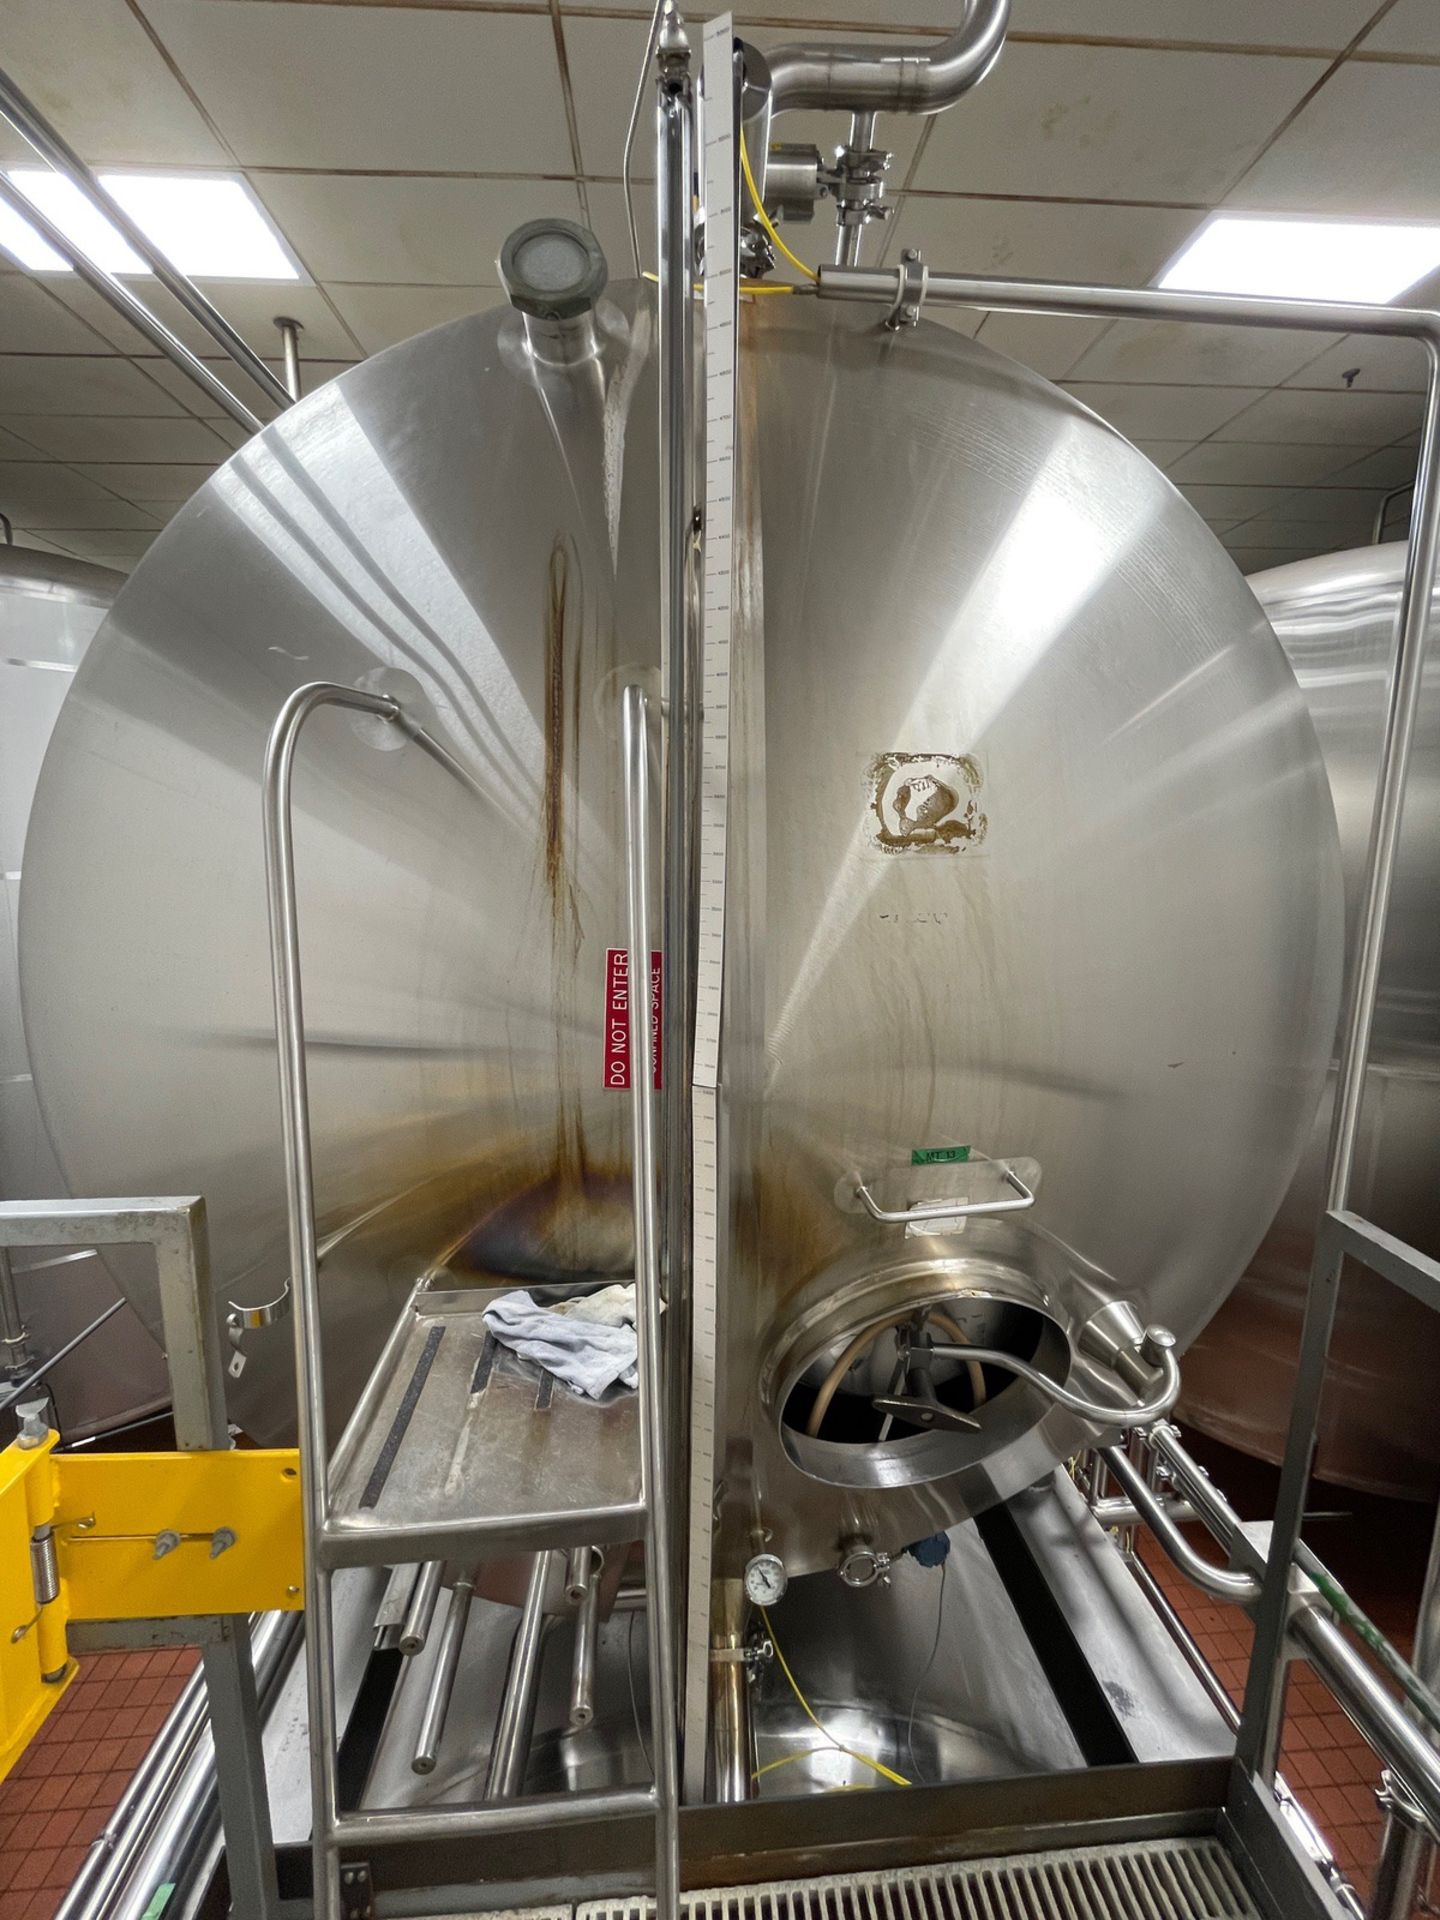 Creamery Package 5,300 Gallon Stainless Steel Horizontal Tank, Vertical Agitation, | Rig Fee: $3500 - Image 2 of 5